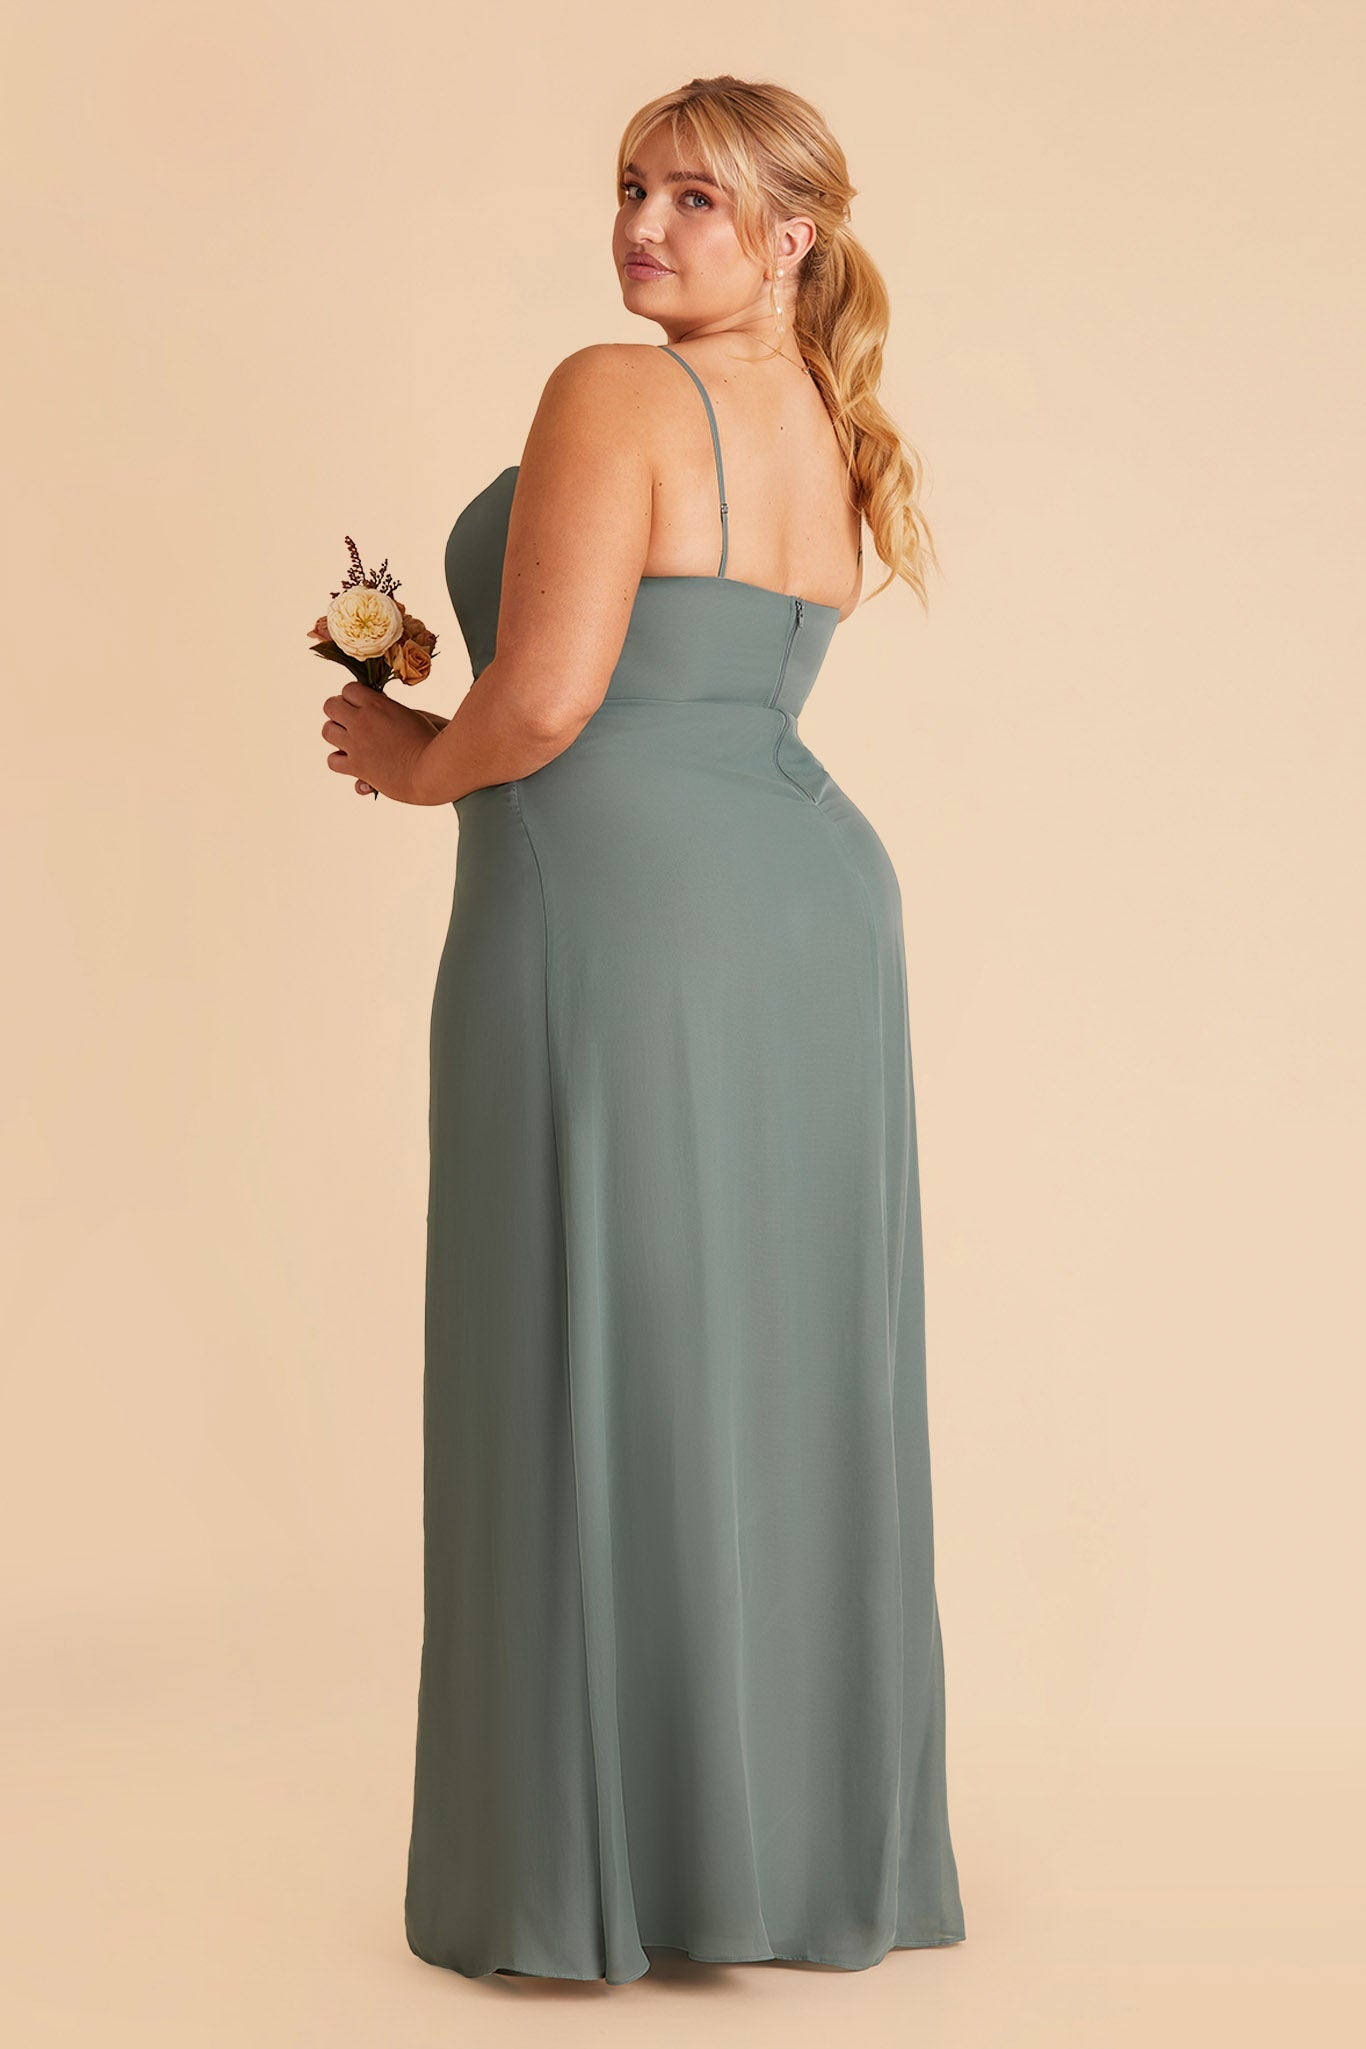 Chris plus size bridesmaid dress with slit in sea glass chiffon by Birdy Grey, side view